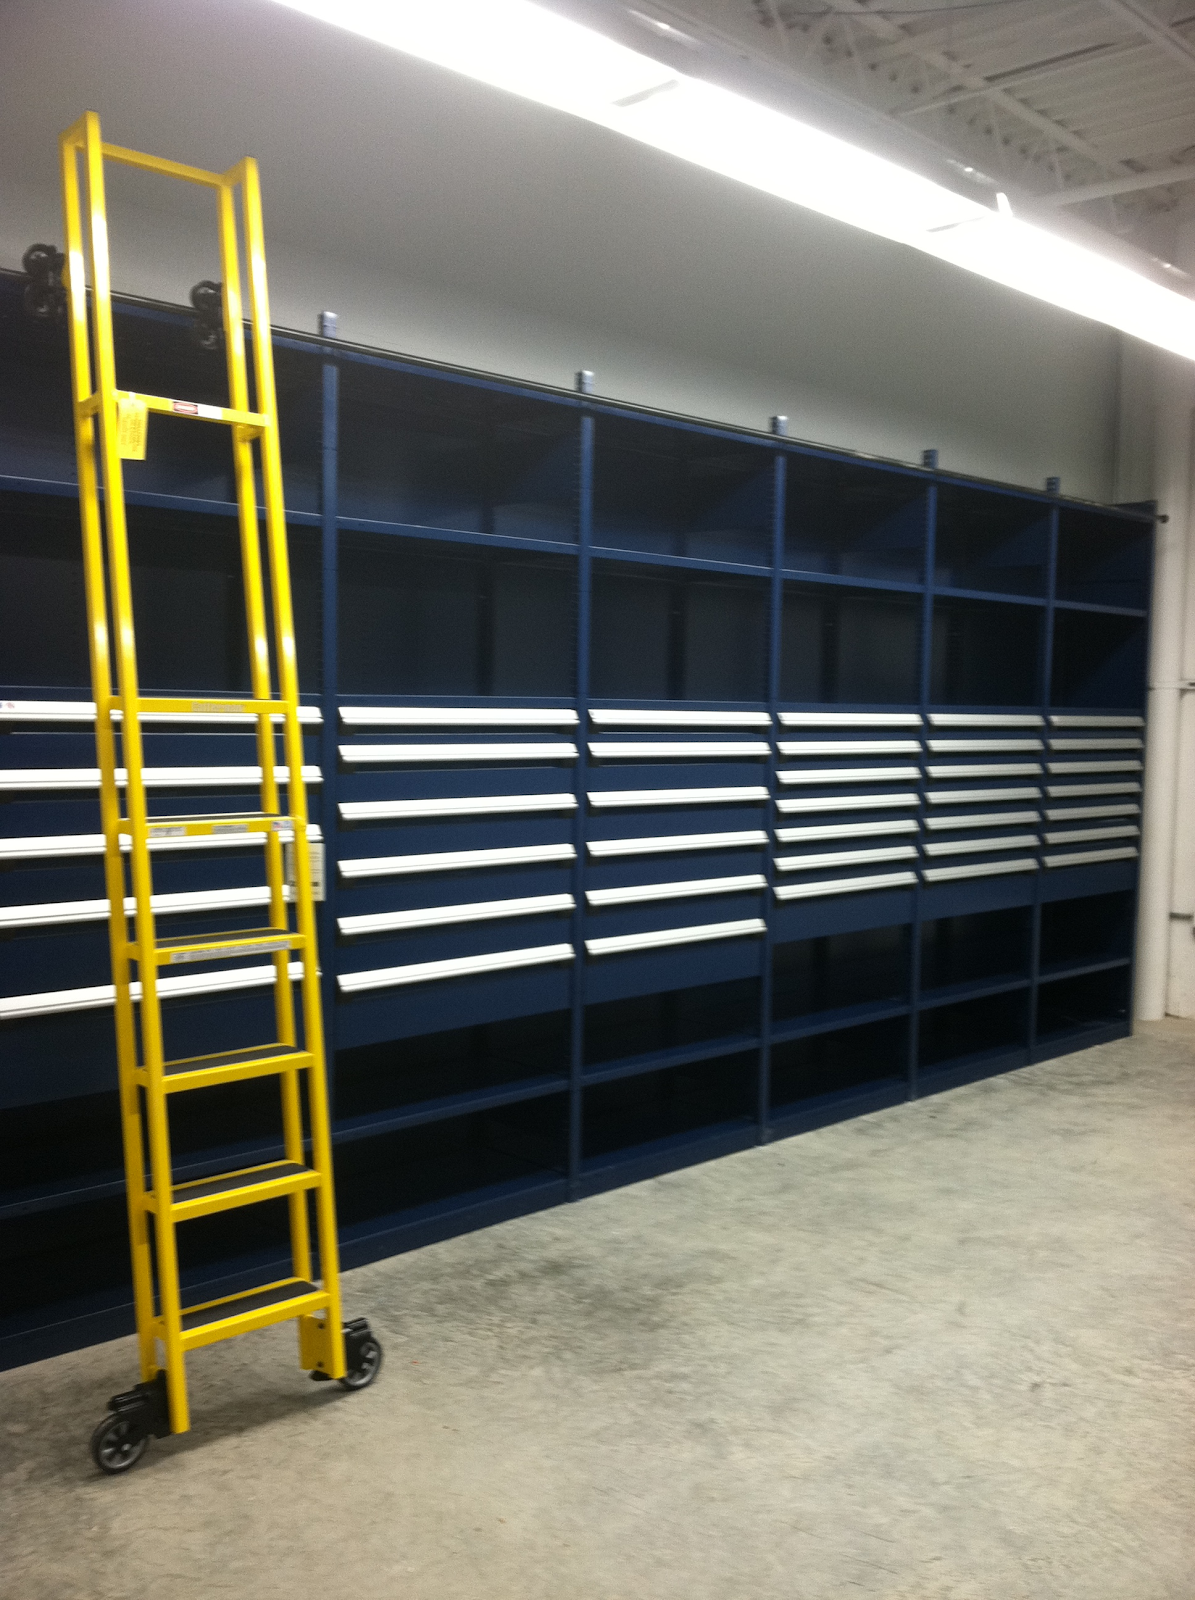 High-rise warehouse shelving with drawers and mobile ladder